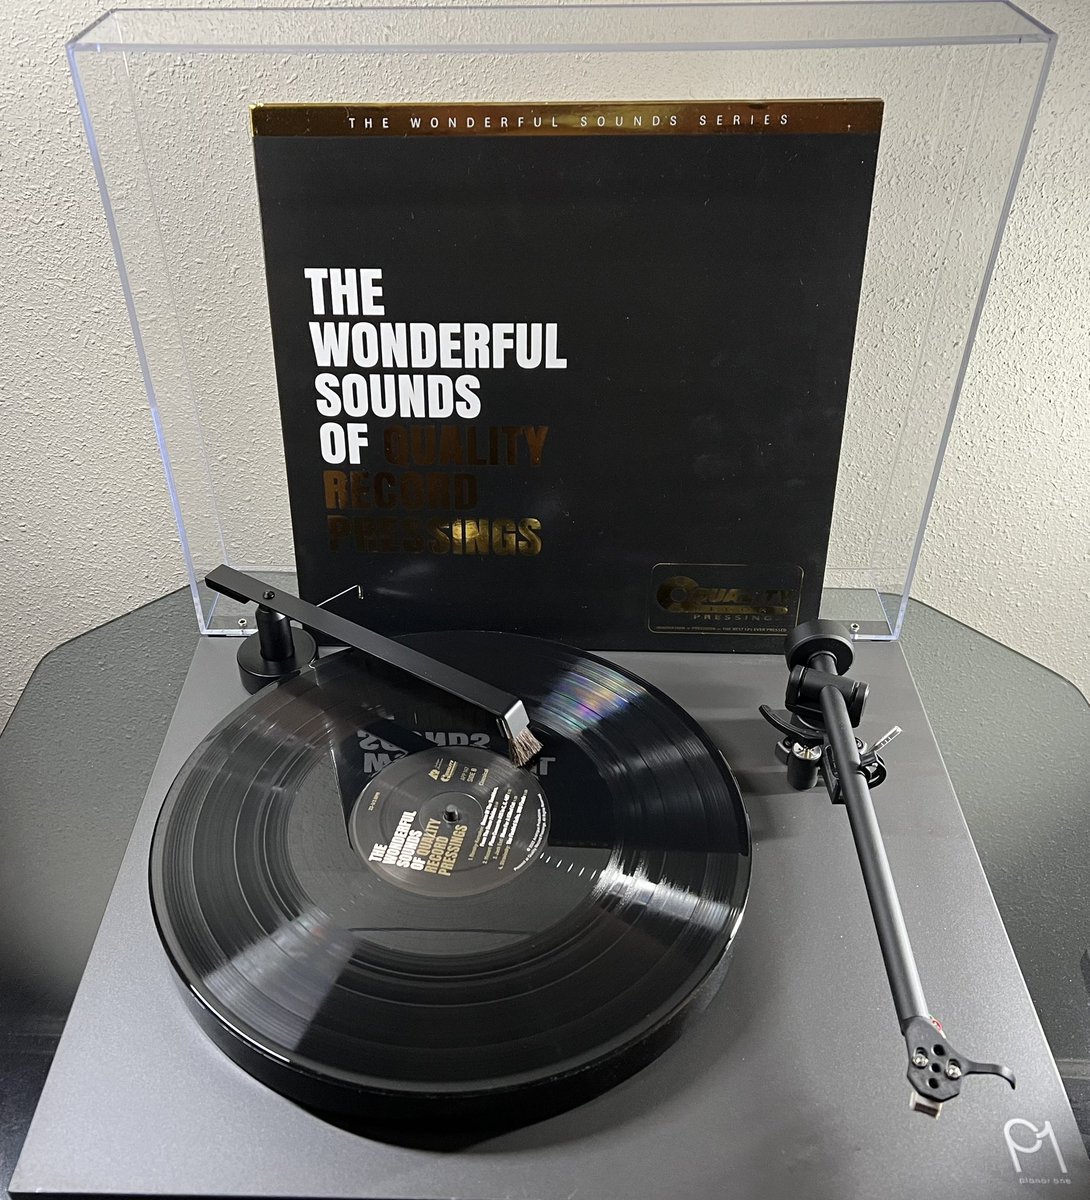 The Wonderful Sounds of Quality Record Pressings. #vinyl #hifi #vinylcommunity #vinylcollection #records #musiclover #recordcollection